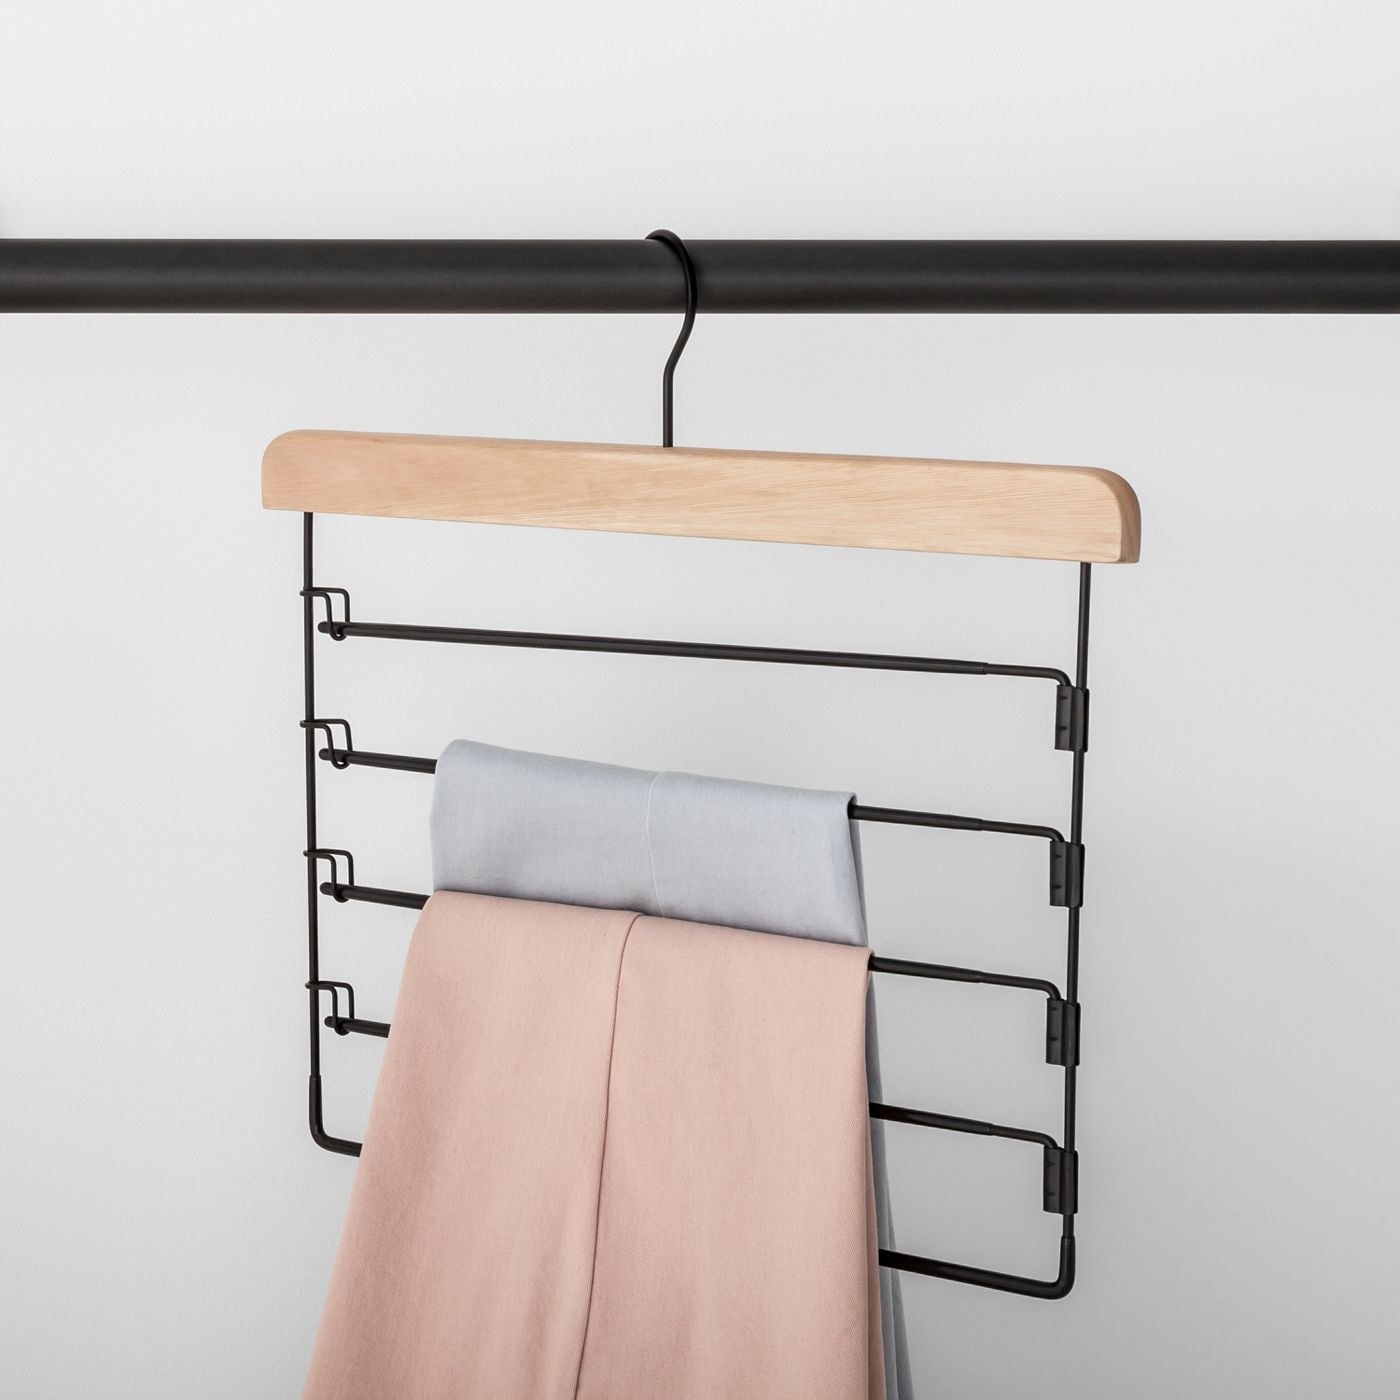 A five tiered pants hanger with clothes on it